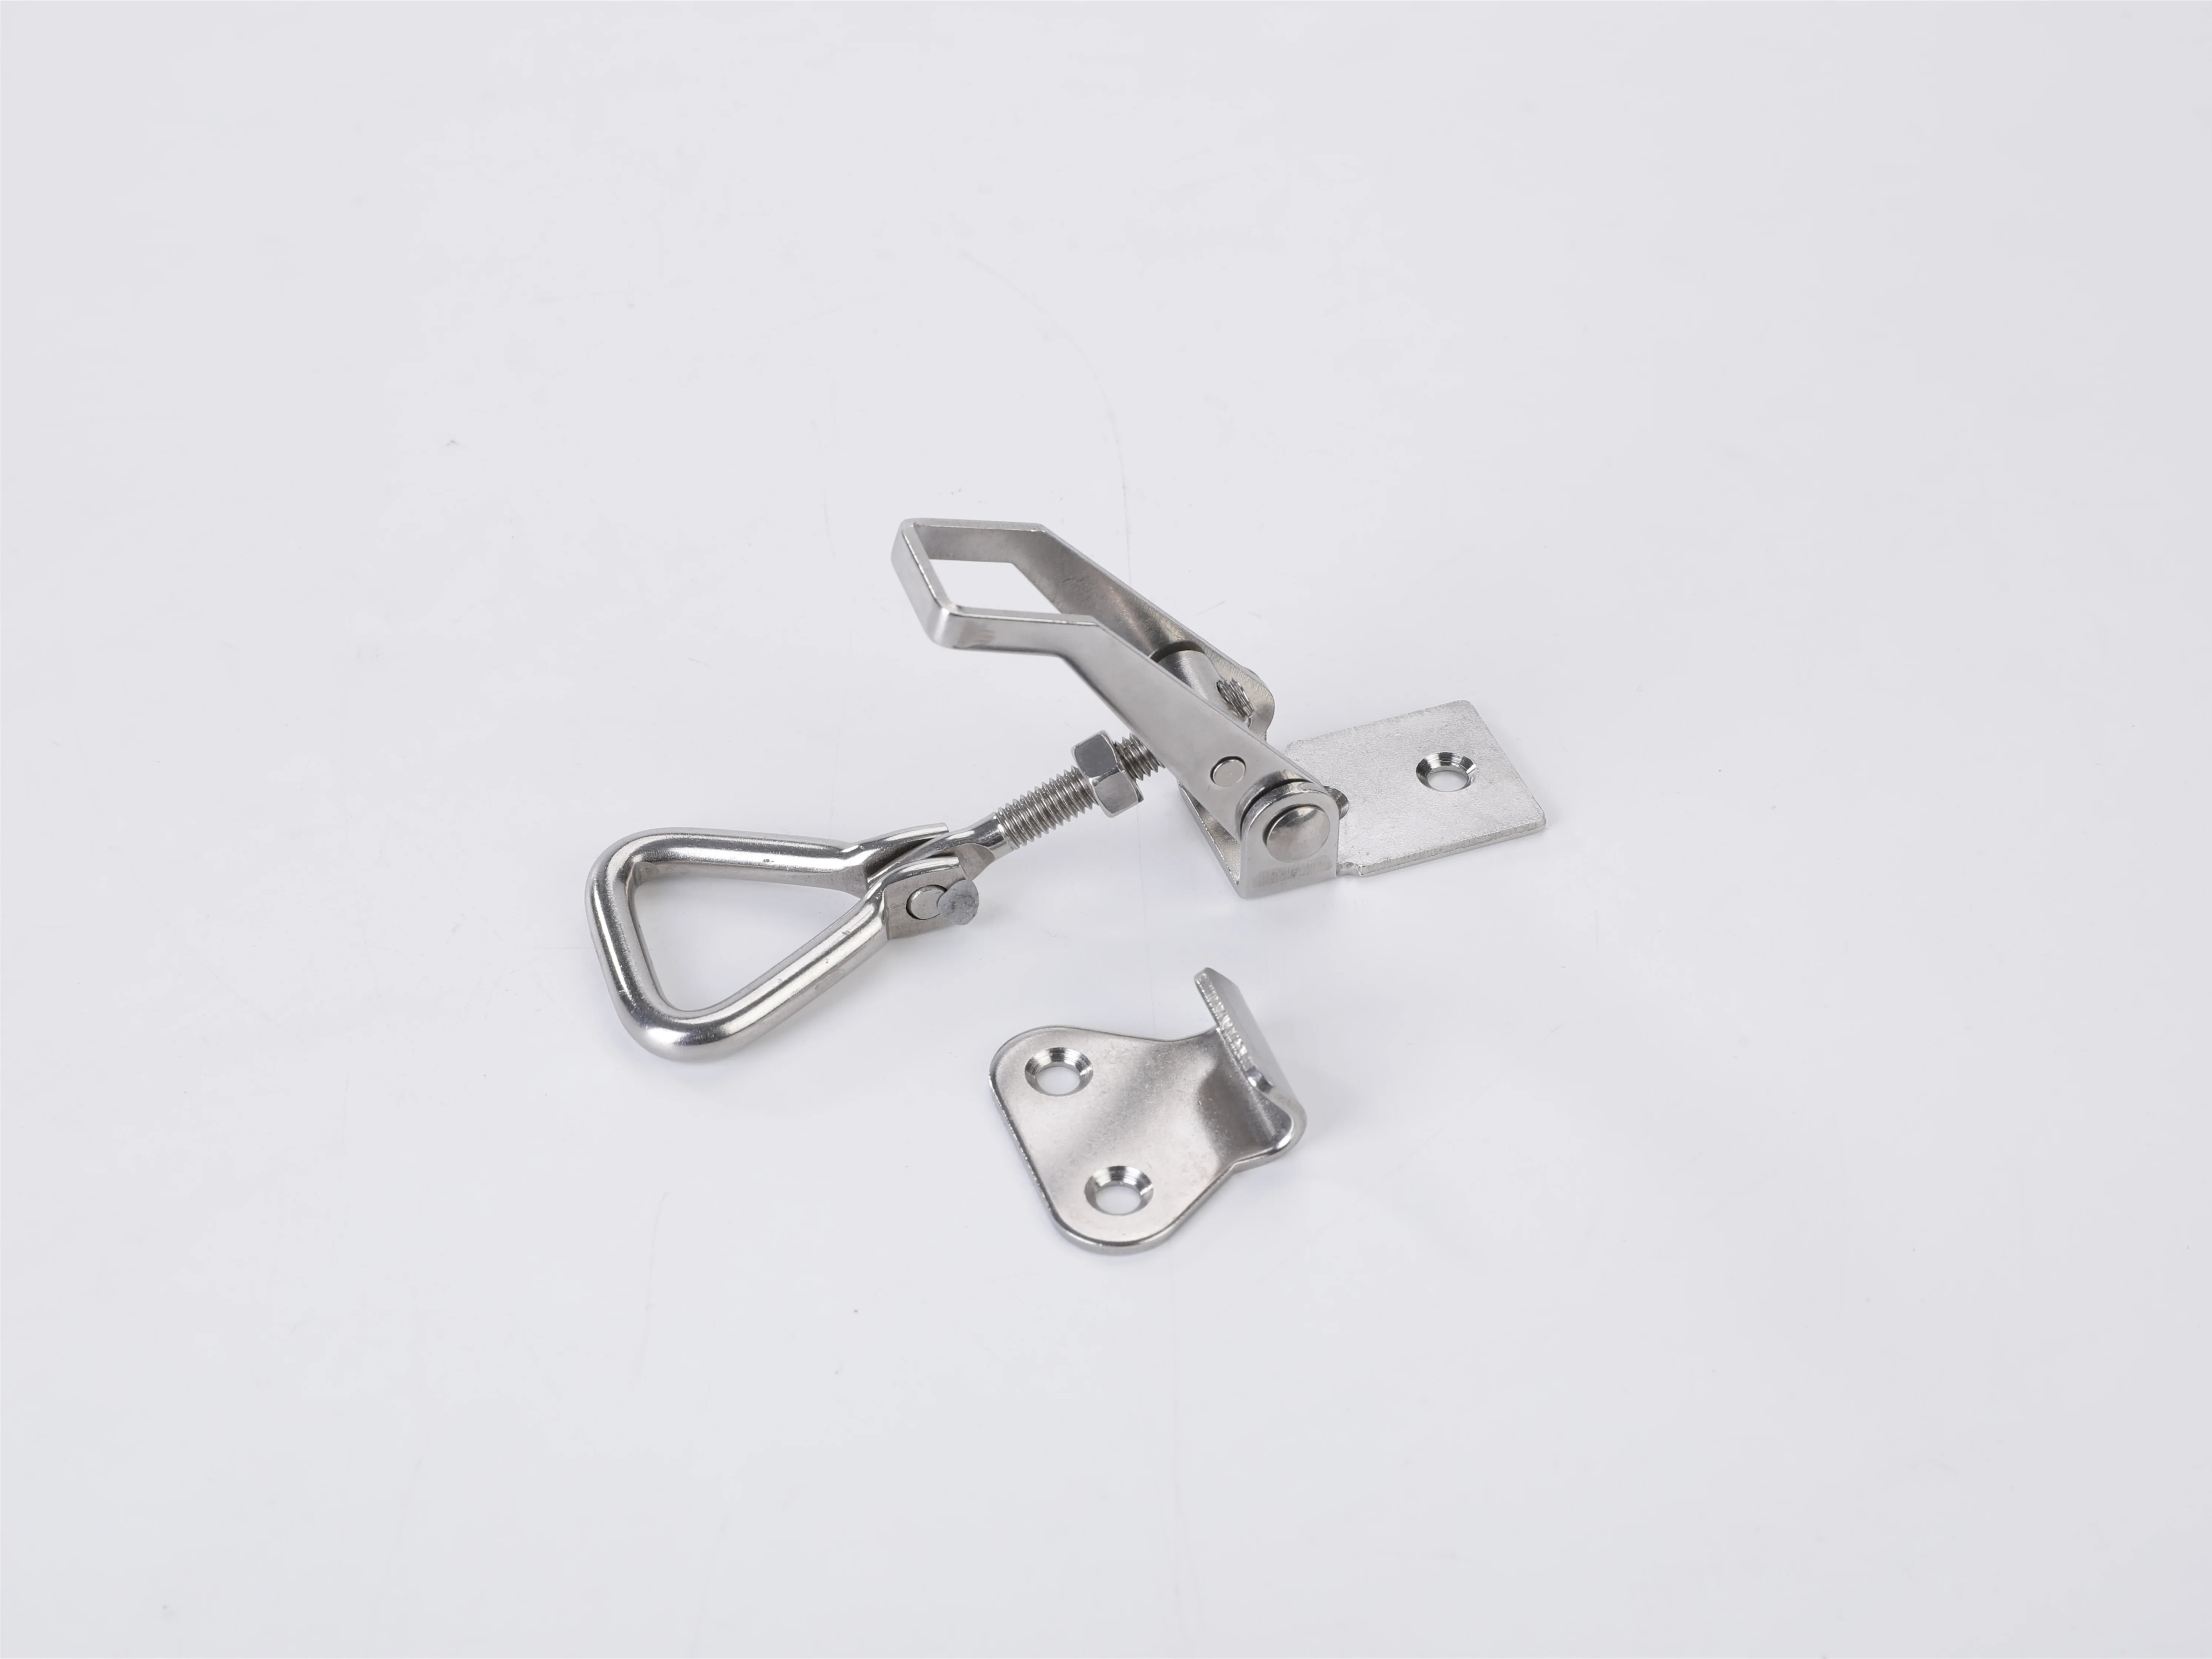 Wood Box Latch Metal Latch Stainless Steel Toggle Latch